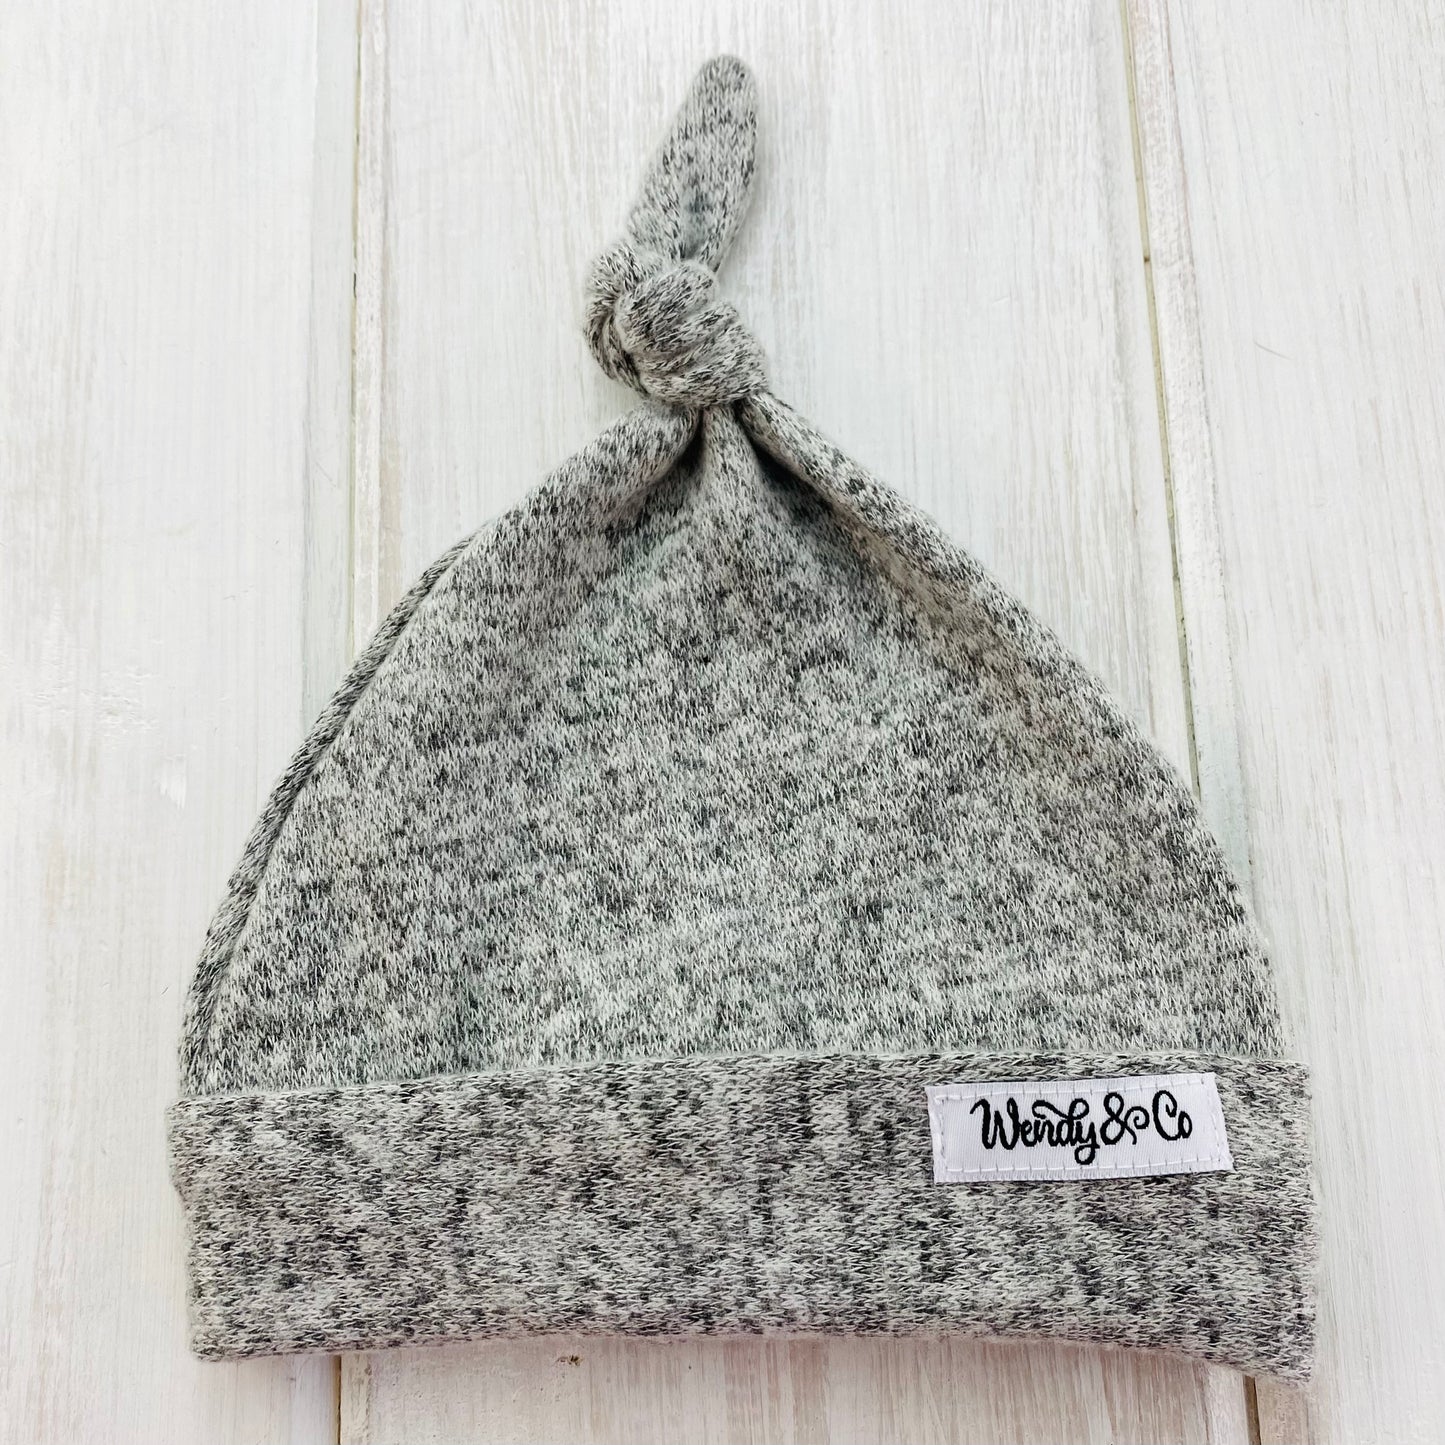 Super soft gray newborn hat with top knot.